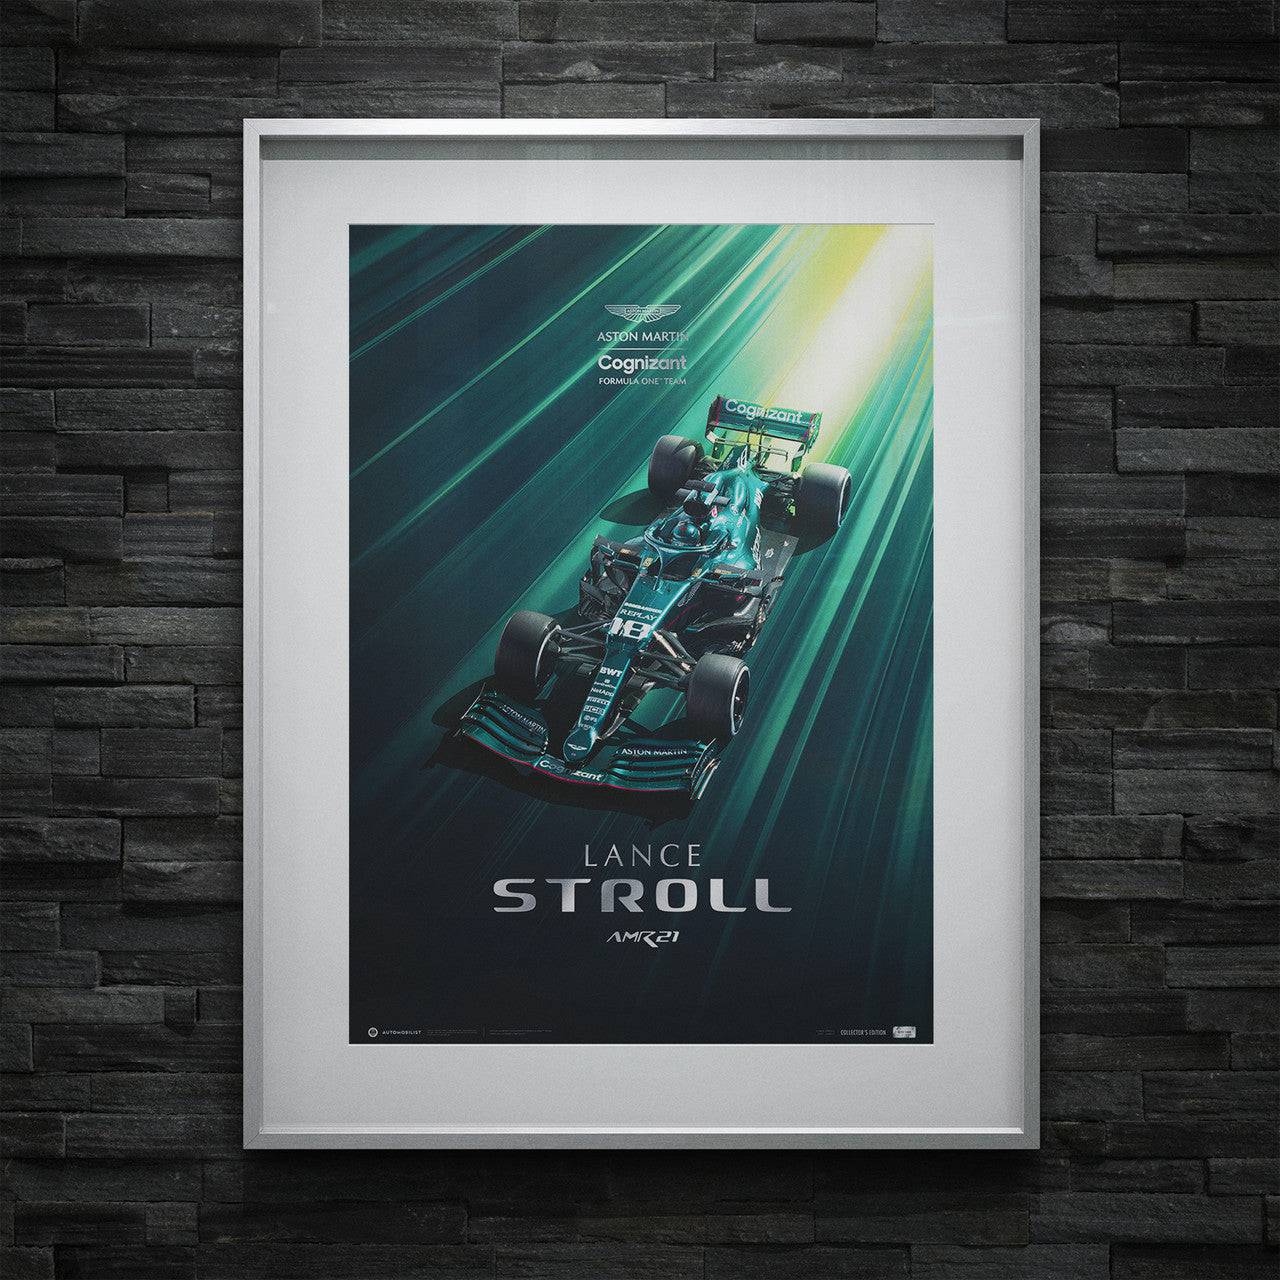 Aston Martin Cognizant Formula One™ Team - Lance Stroll - 2021 | Collector’s Edition | Unique Numbers